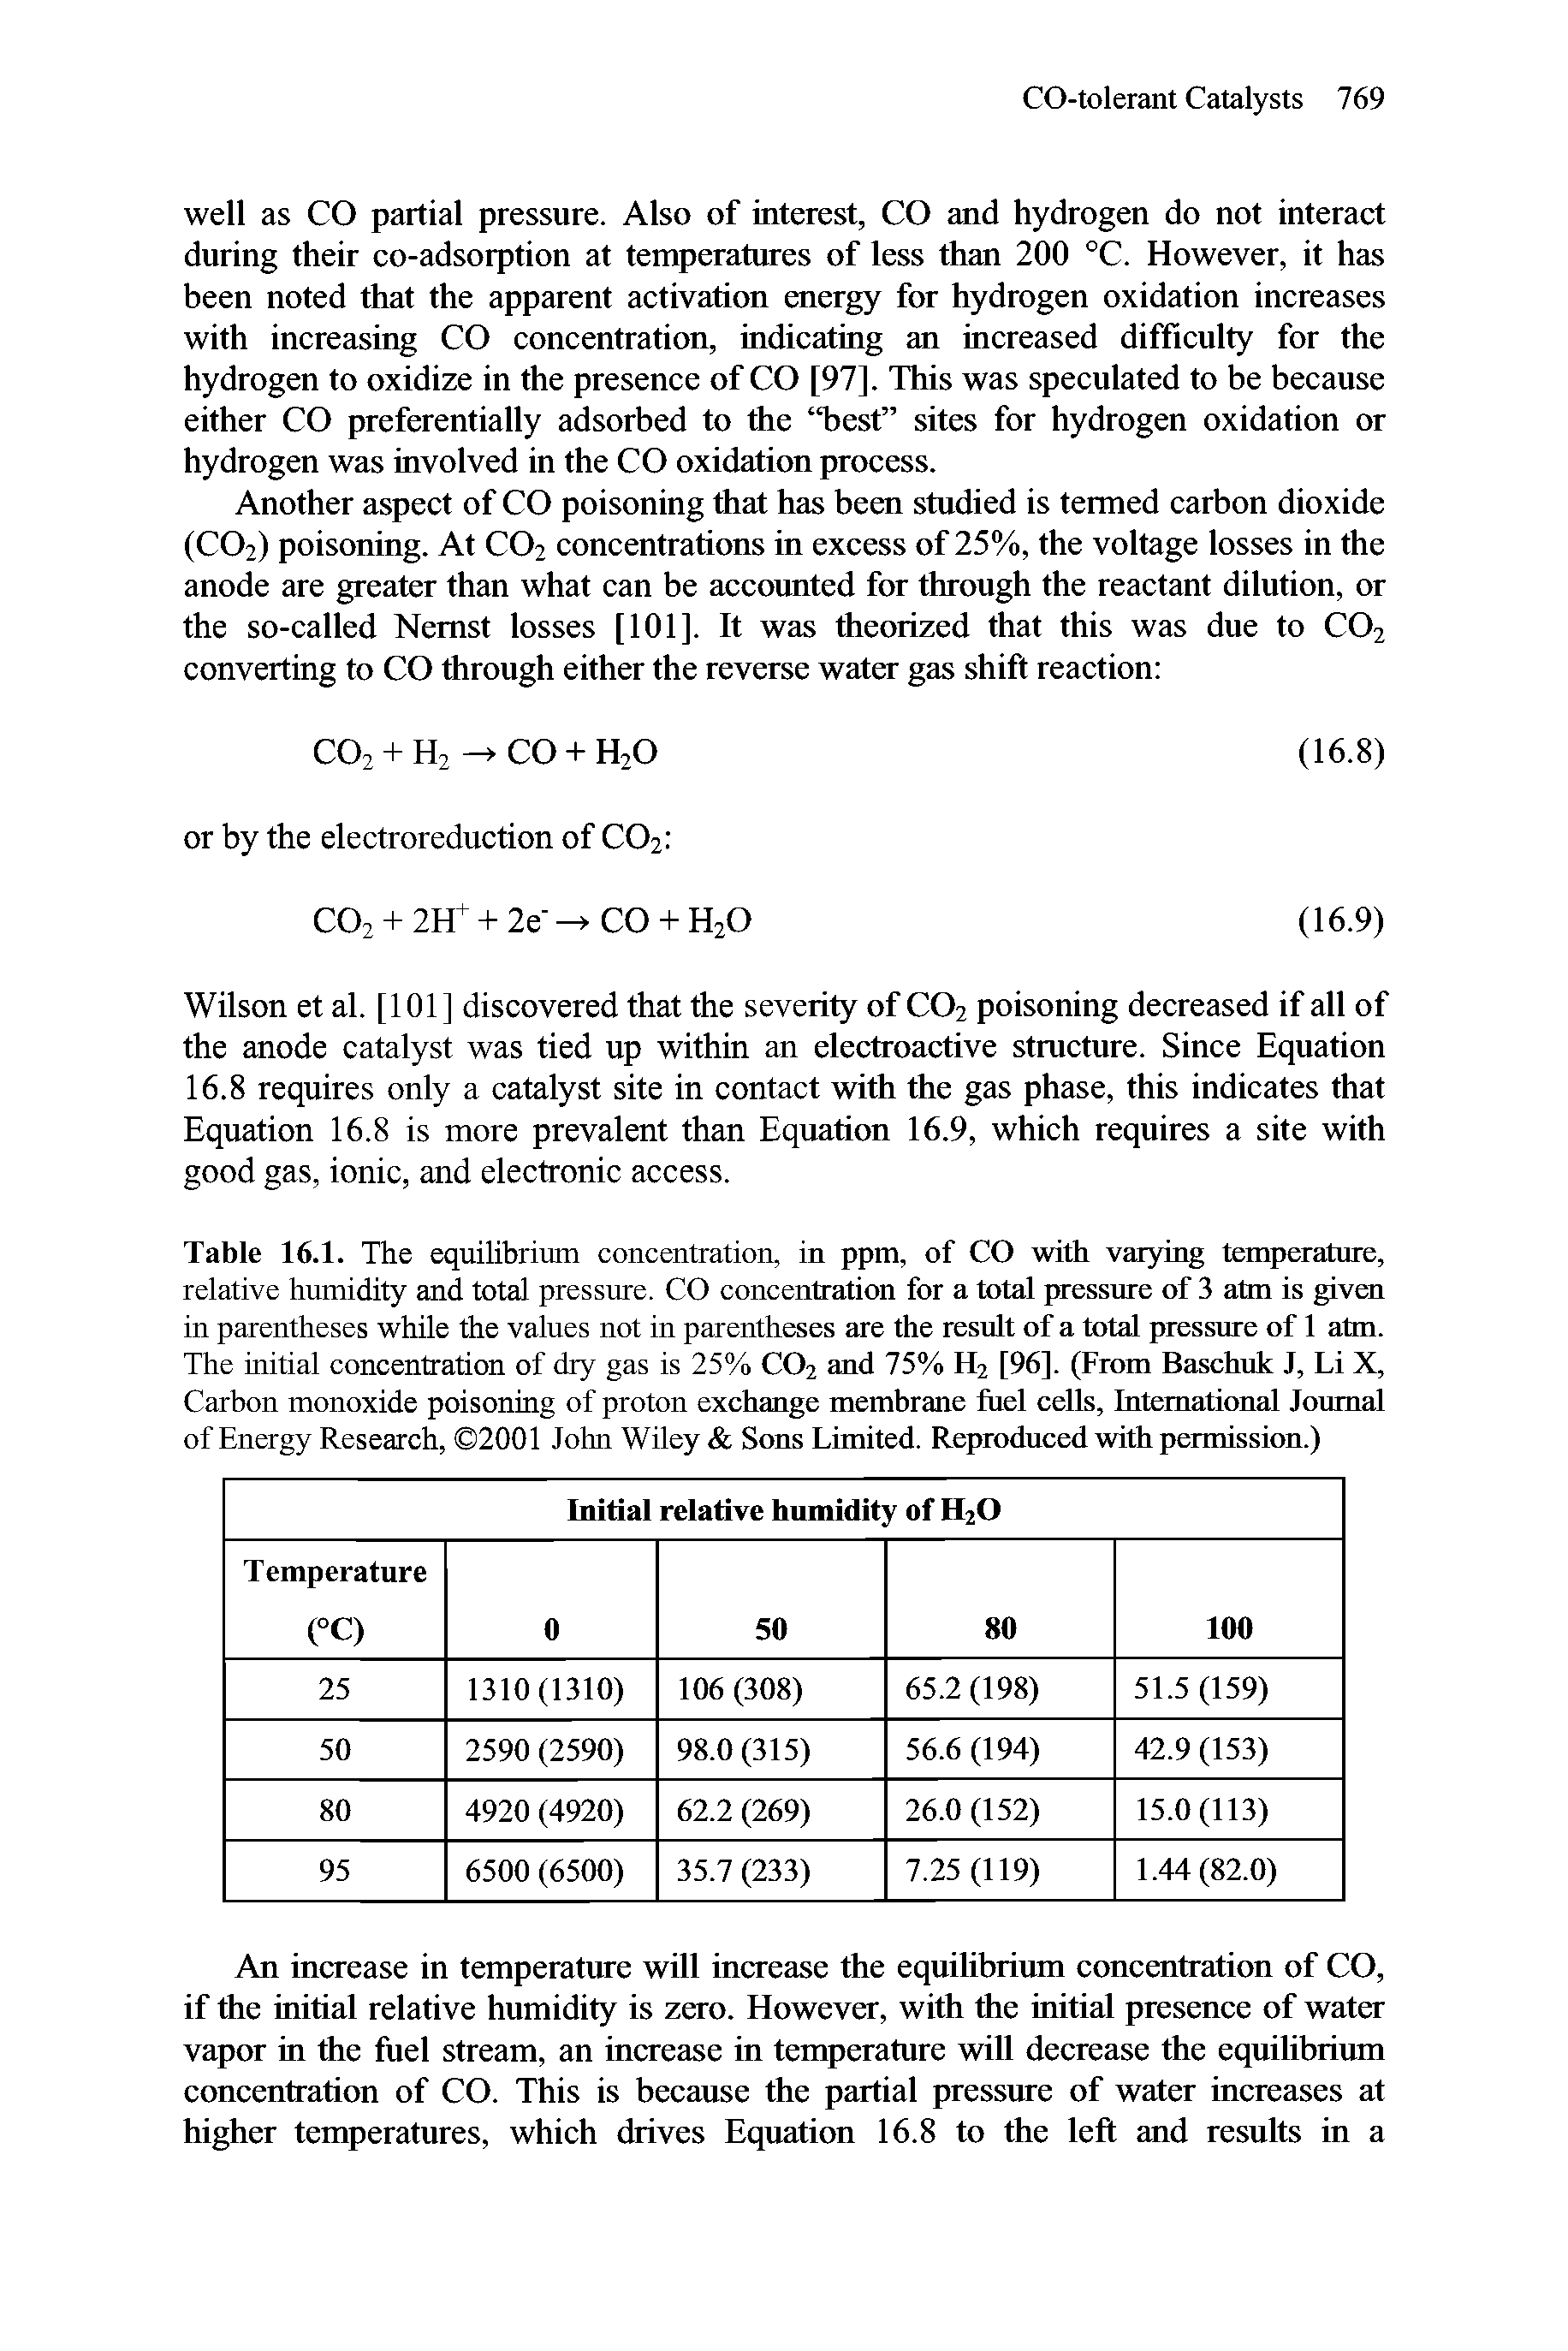 Table 16.1. The equilibrium concentration, in ppm, of CO with vaiying temperature, relative humidity and total pressure. CO concentration for a total pressure of 3 atm is given in parentheses while the values not in parentheses are the result of a total pressure of 1 atm. The initial concentration of dry gas is 25% CO2 and 75% H2 [96]. (From Baschuk J, Li X, Carbon monoxide poisoning of proton exchange membrane fuel cells. International Journal of Energy Research, 2001 John Wiley Sons Limited. Reproduced with permission.)...